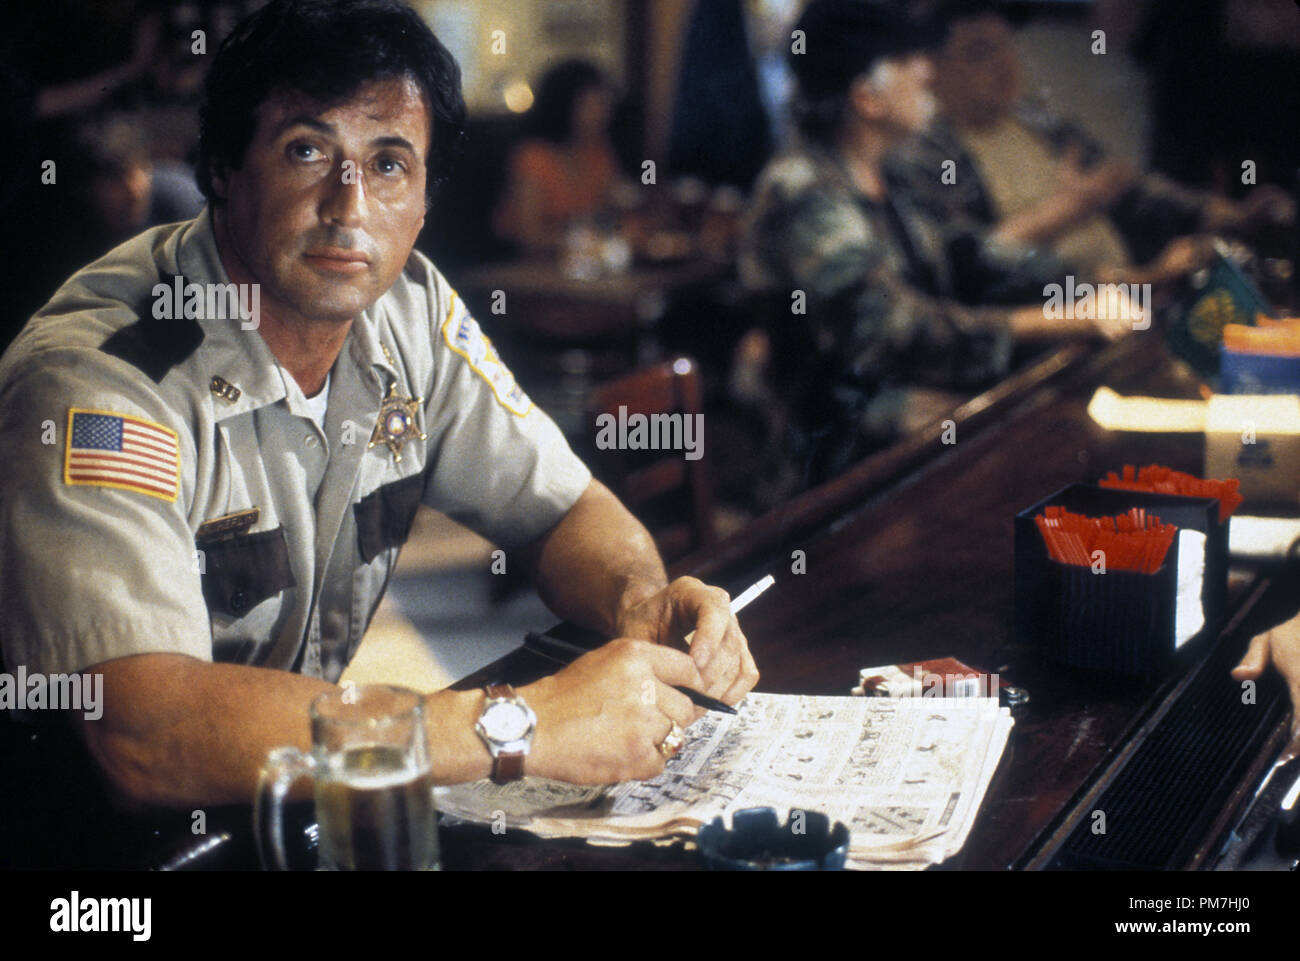 Film Still from 'Cop Land' Sylvester Stallone © 1997 Miramax Films Photo Credit: Sam Emerson   File Reference # 31013376THA  For Editorial Use Only - All Rights Reserved Stock Photo